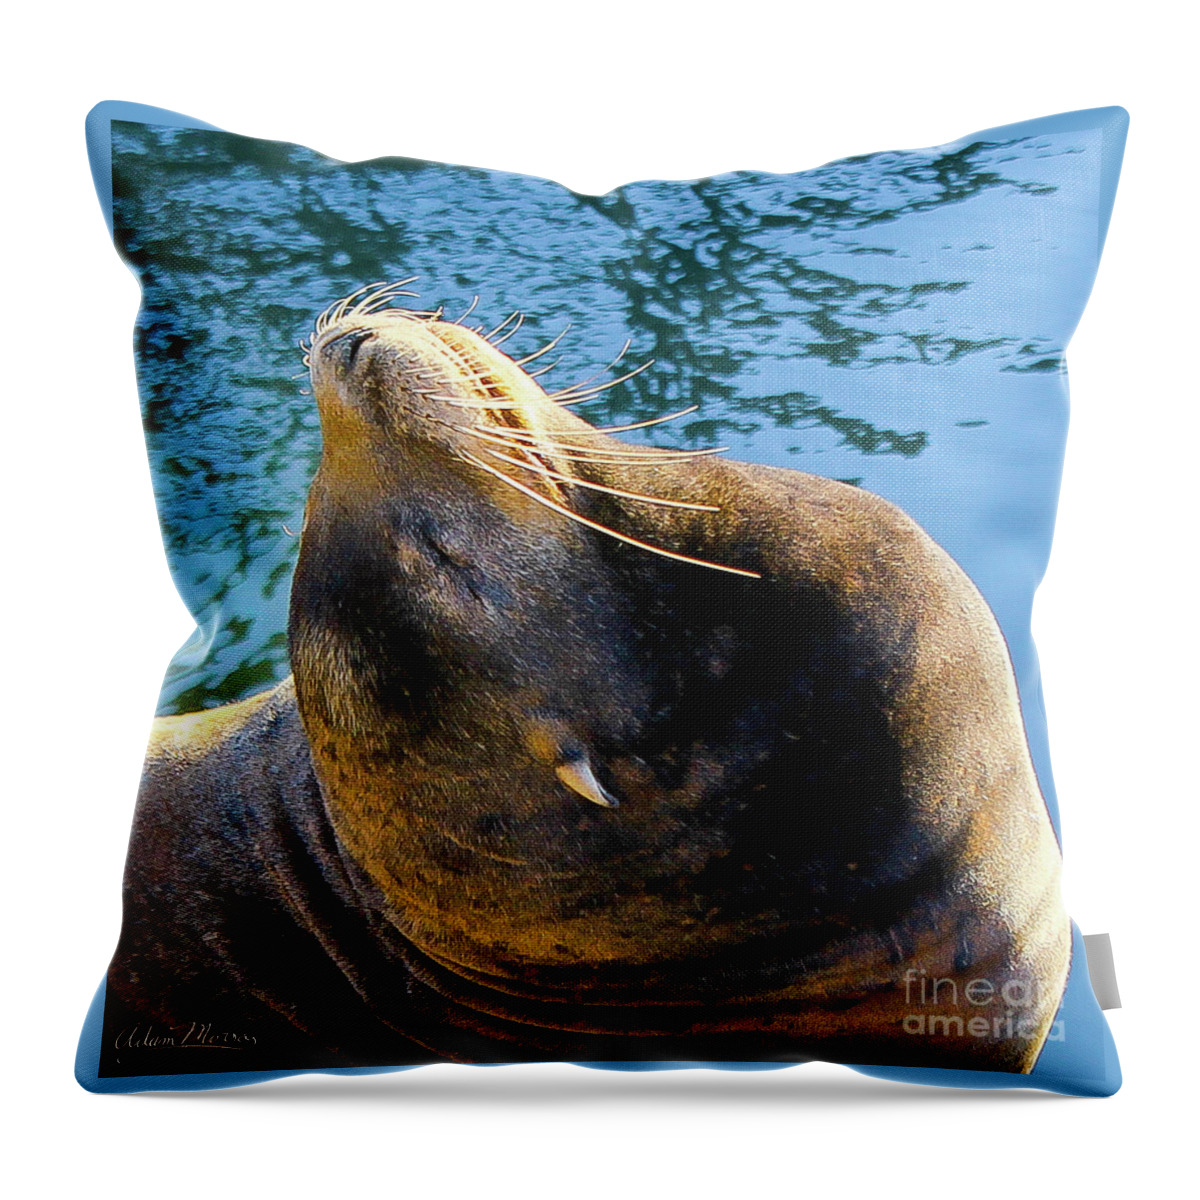 Wildlife Throw Pillow featuring the photograph Stretch by Adam Morsa